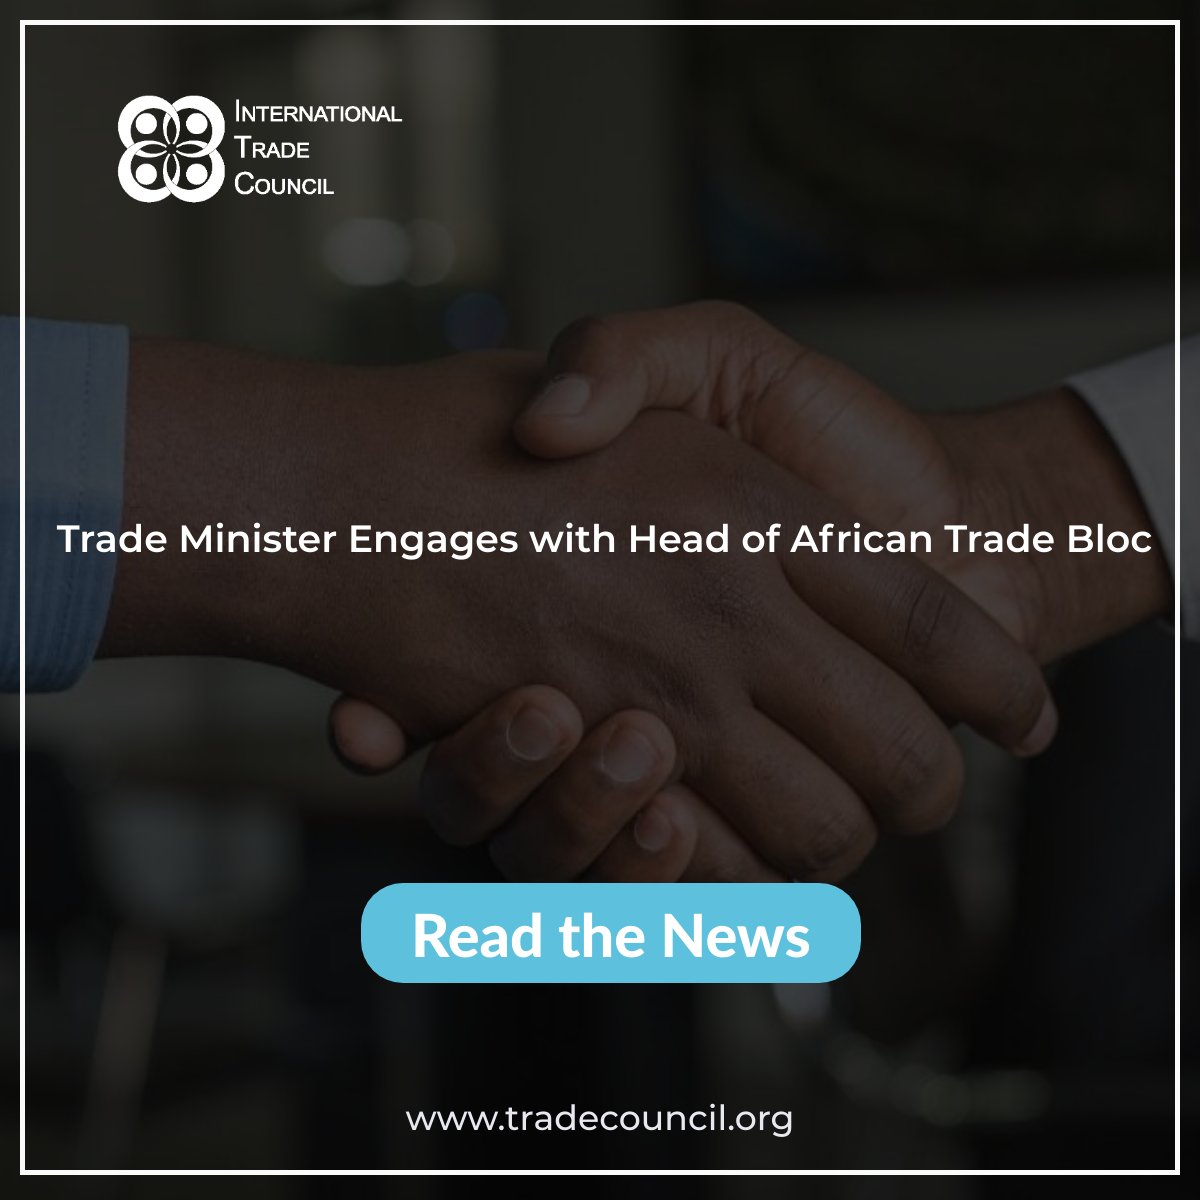 Trade Minister Engages with Head of African Trade Bloc
Read The News: tradecouncil.org/trade-minister…
#ITCNewsUpdates #BreakingNews #TradeRelations #AfCFTA #EconomicDiplomacy #GlobalPartnerships #InternationalTrade #NewsUpdate